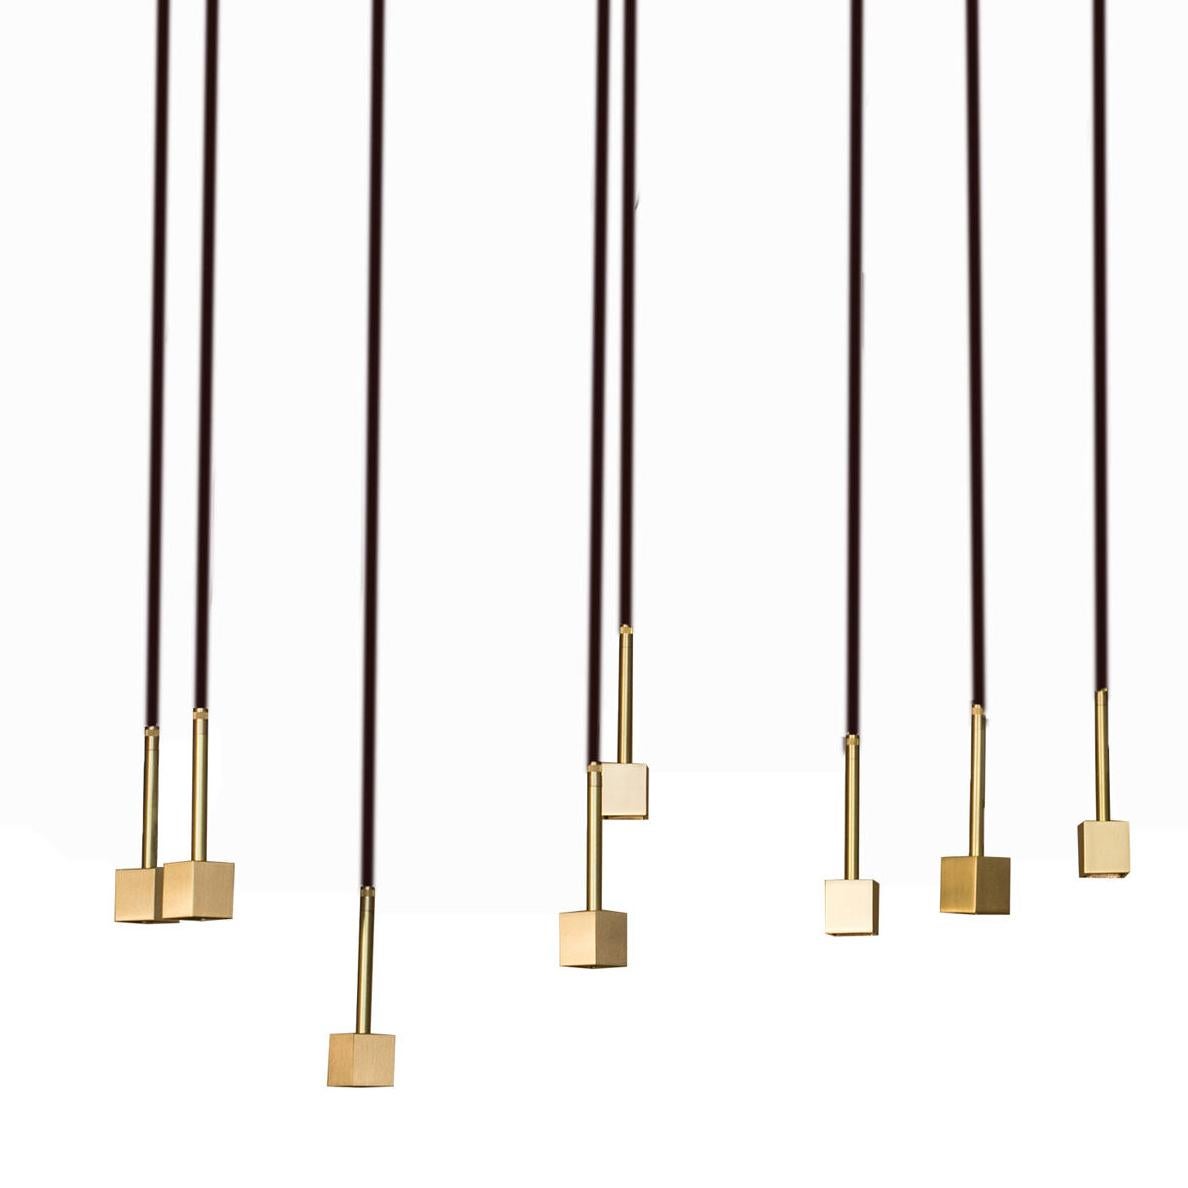 Ceiling lamp designed by Peter Ghyczy in 2009.
Manufactured by Ghyczy (Netherlands)

MW29 Cluster is a pendant lamp with 14 spots. The lamp can be used as a pendant lamp which can be dimmed. The lamp-socket is casted metal. Sand casting is a